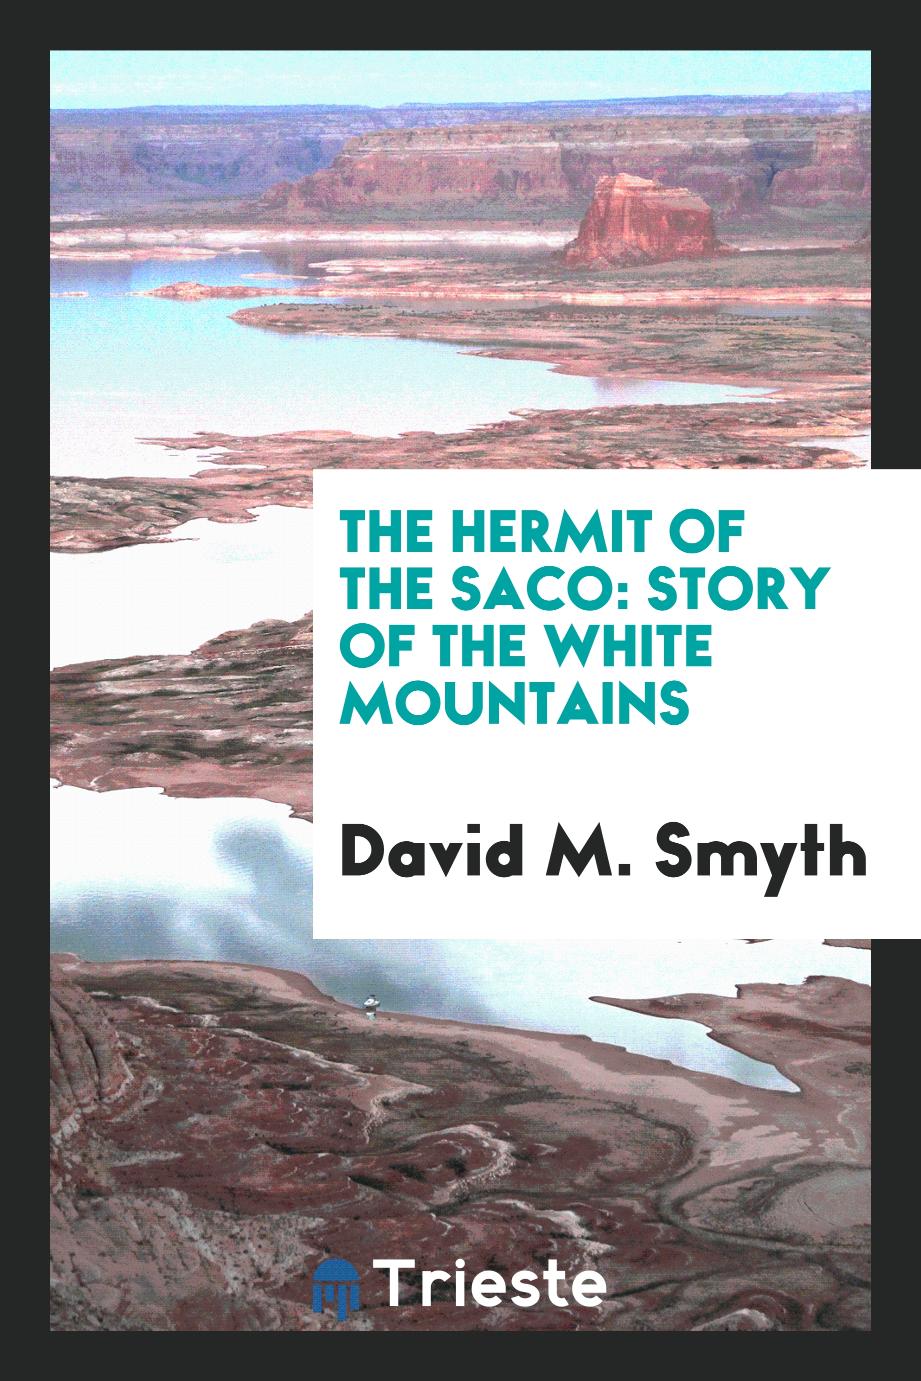 The hermit of the Saco: story of the White Mountains